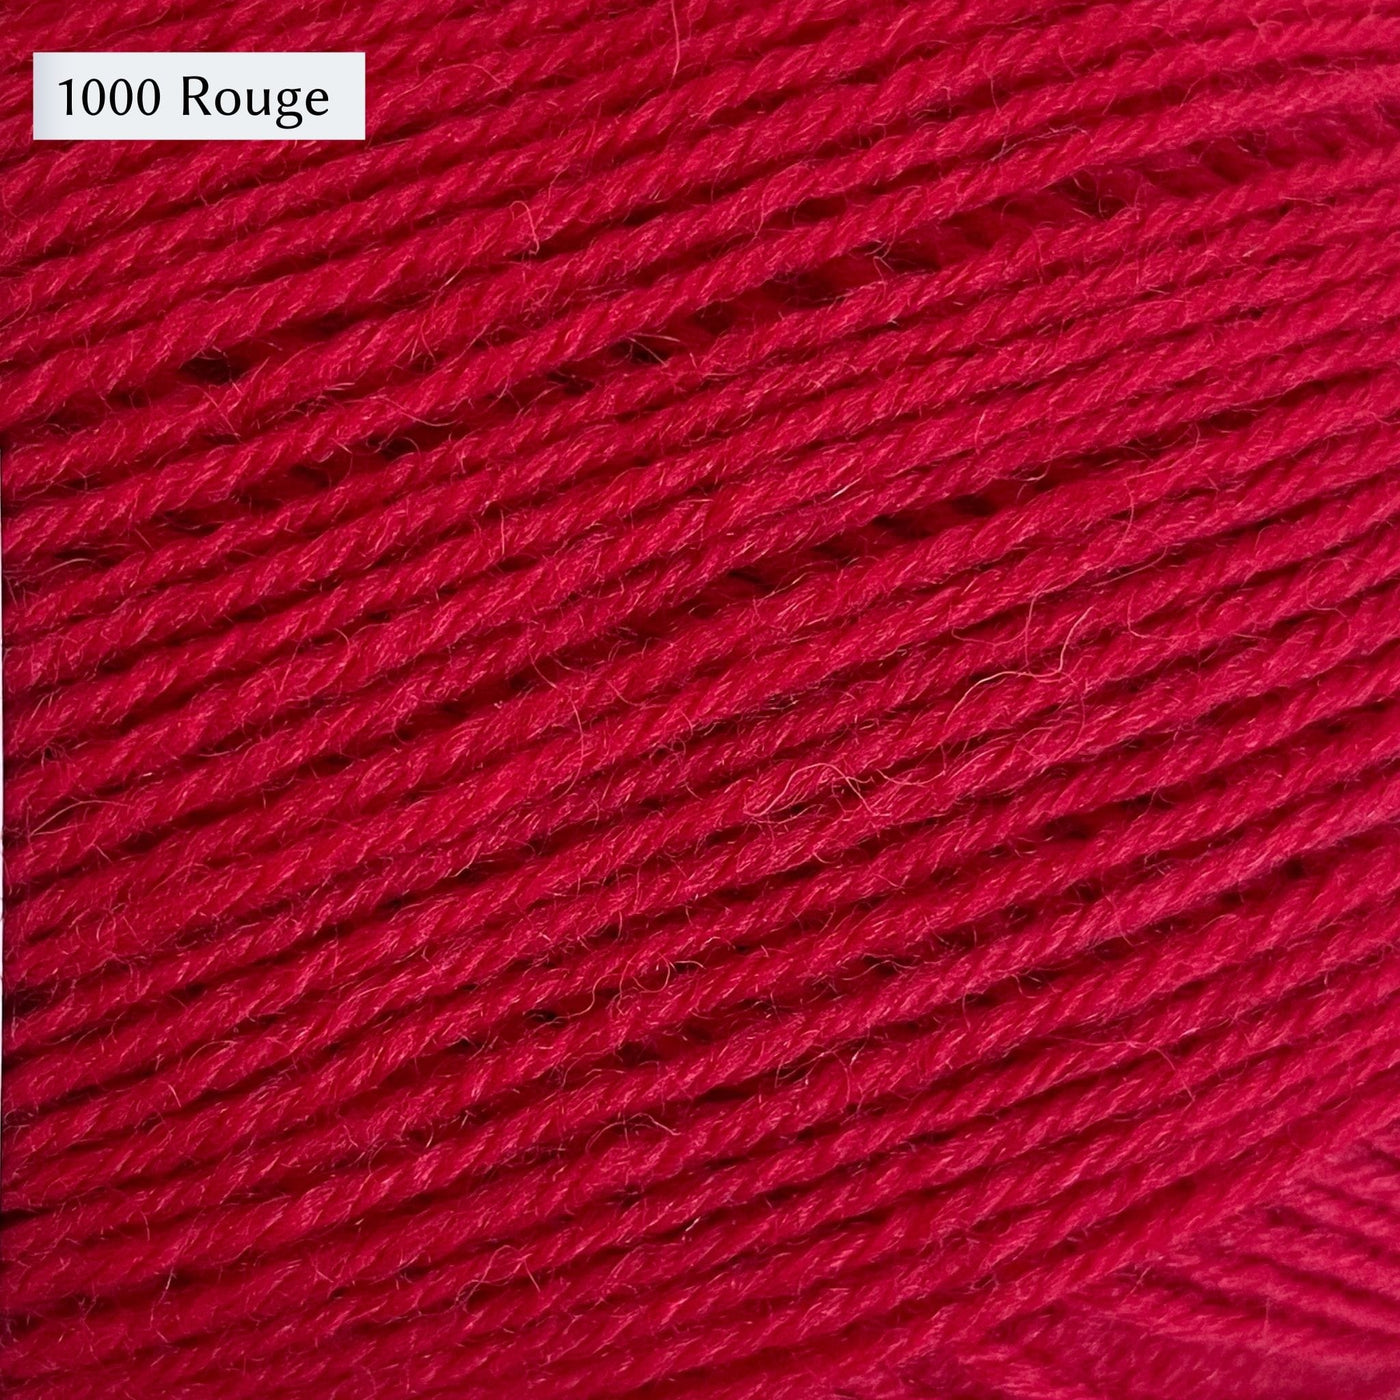 West Yorkshire Spinners Signature 4ply yarn, 100-gram ball, fingering weight, in color 1000 Rouge, a bright, warm red.